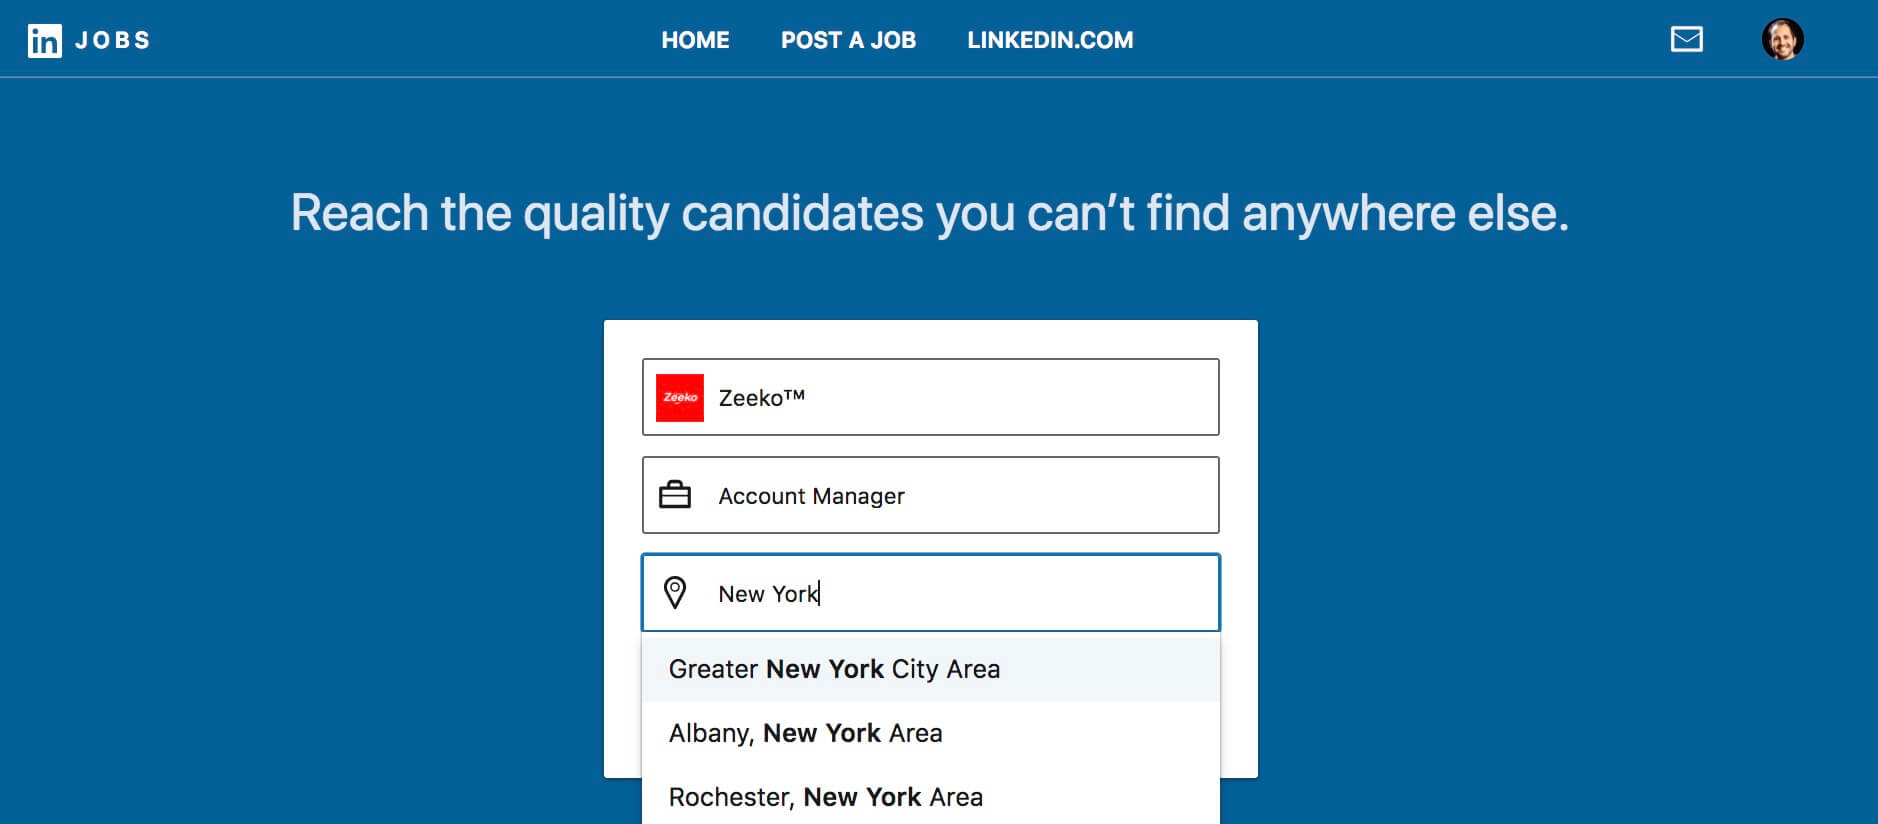 How to post a job on Linkedin - choose your city